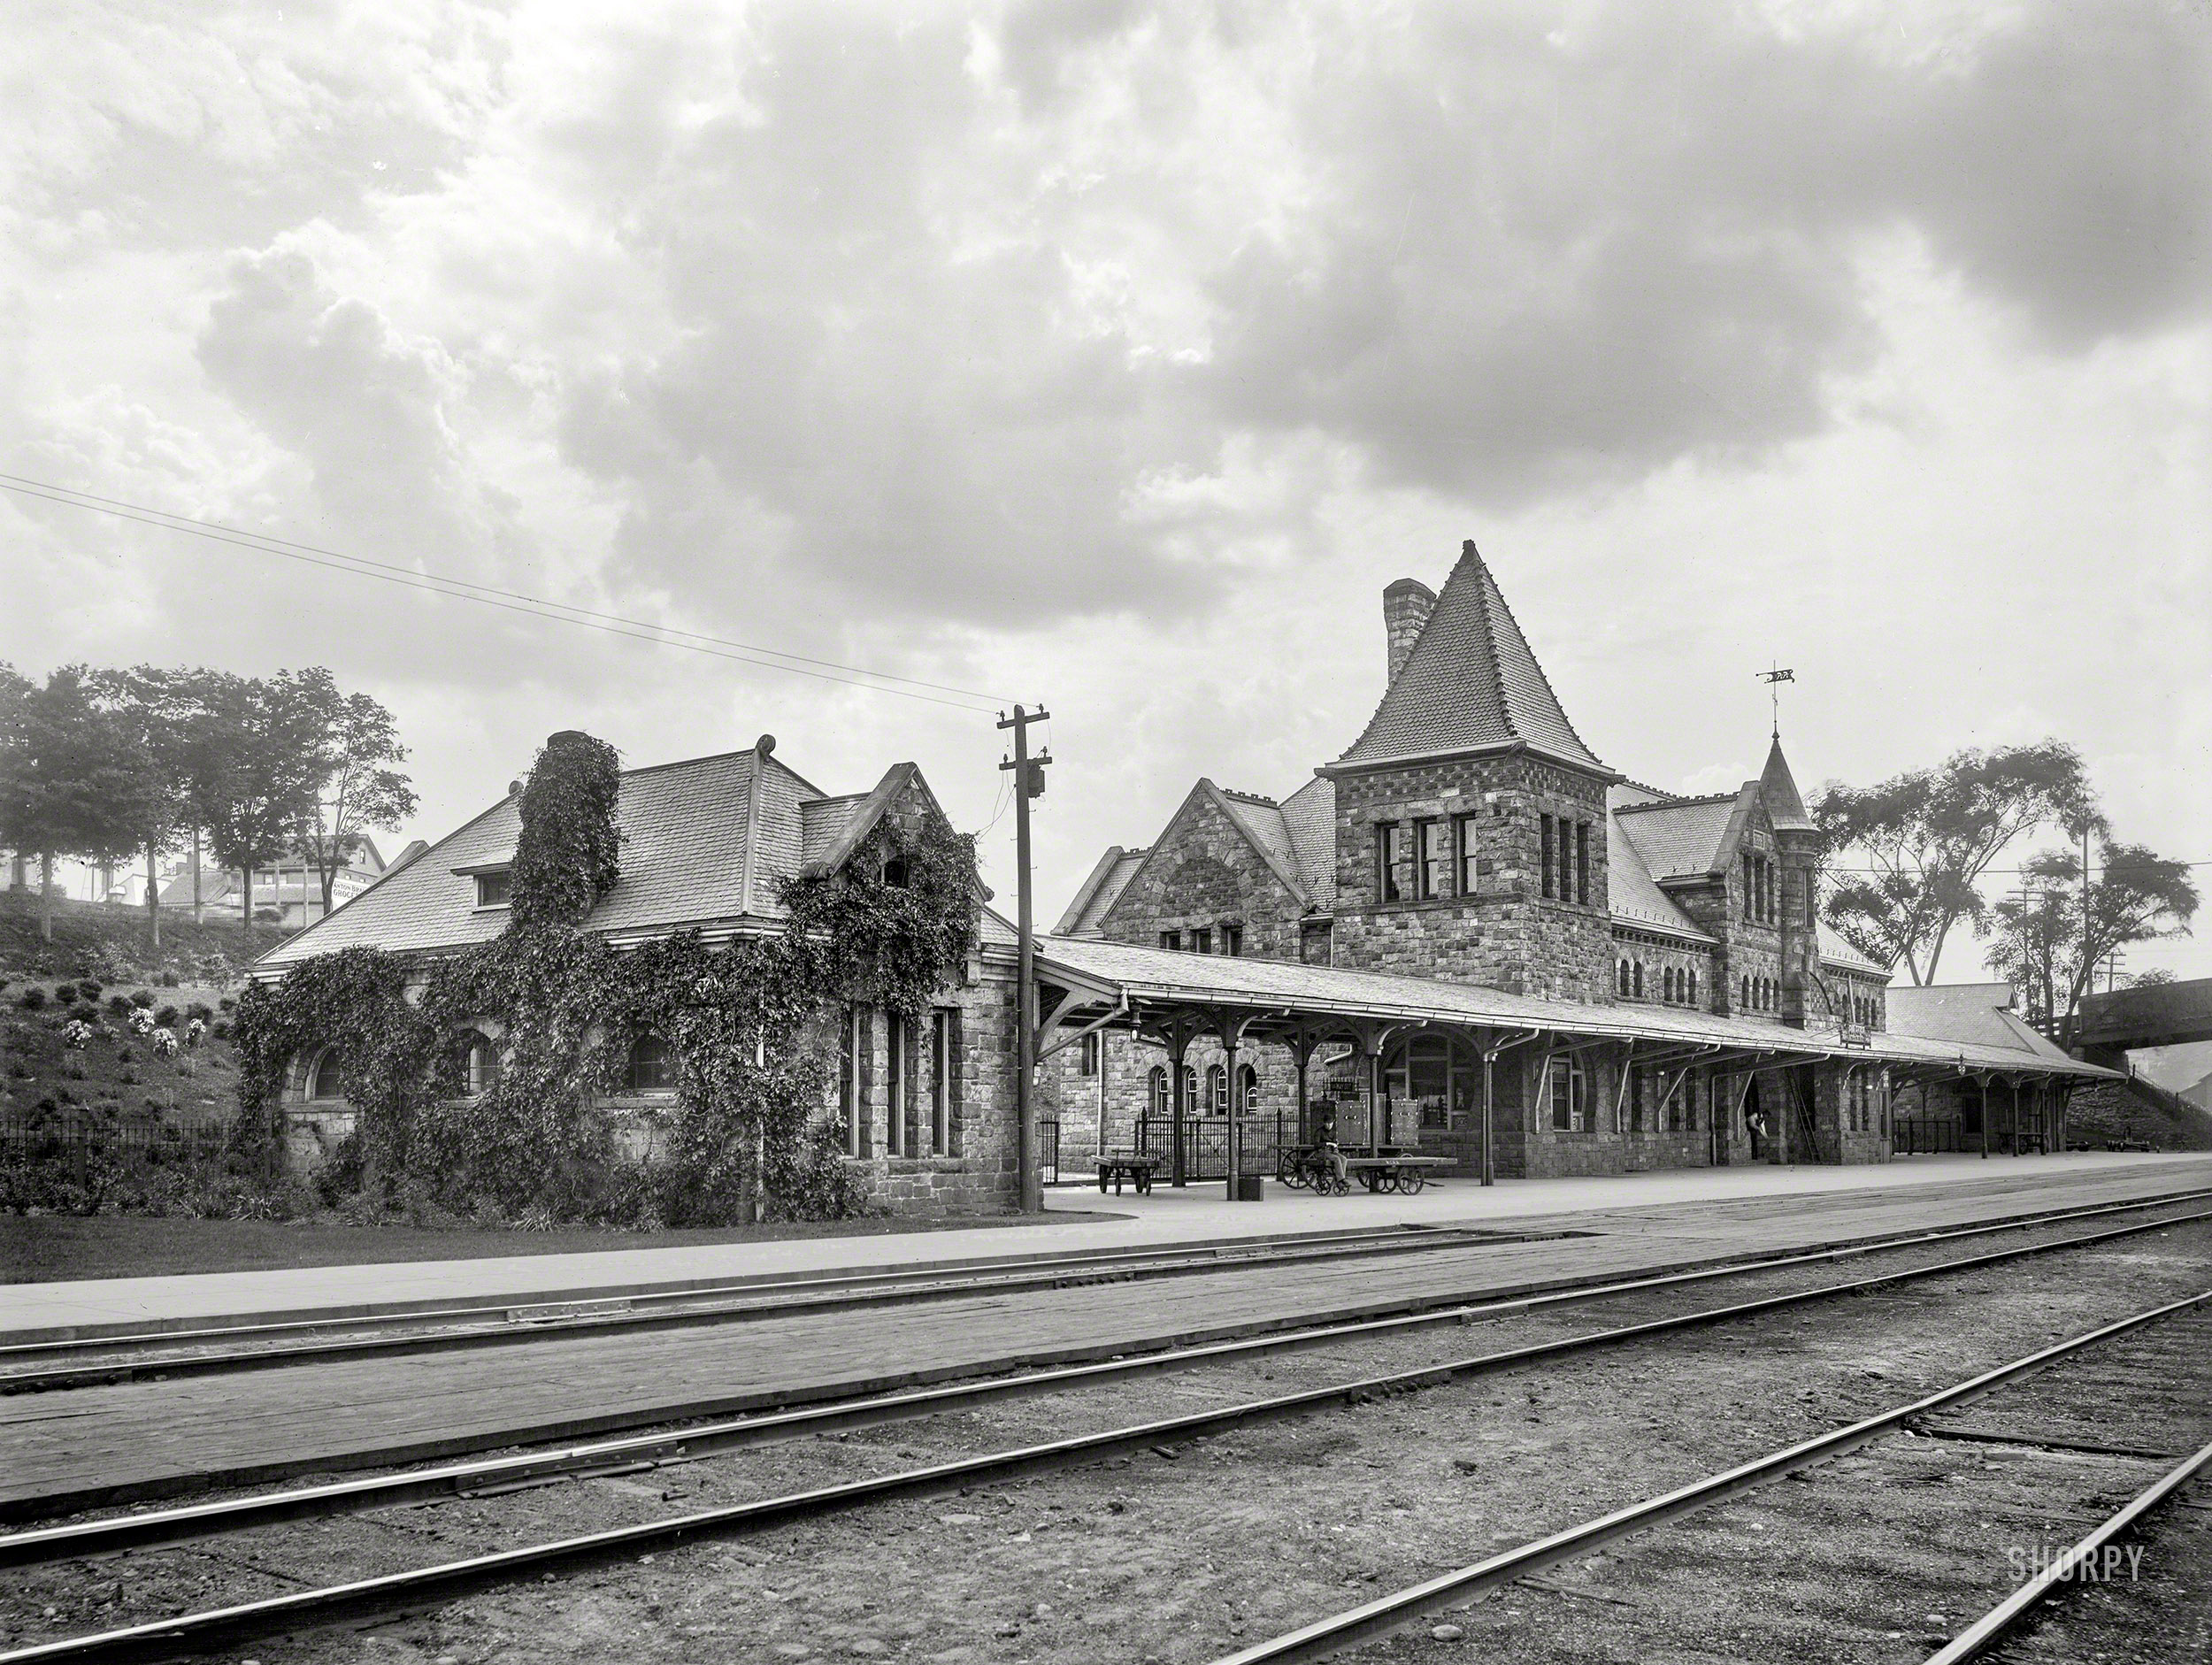 Circa 1901. "Michigan Central R.R. station at Ann Arbor." 8x10 inch dry plate glass negative, Detroit Photographic Company. View full size.